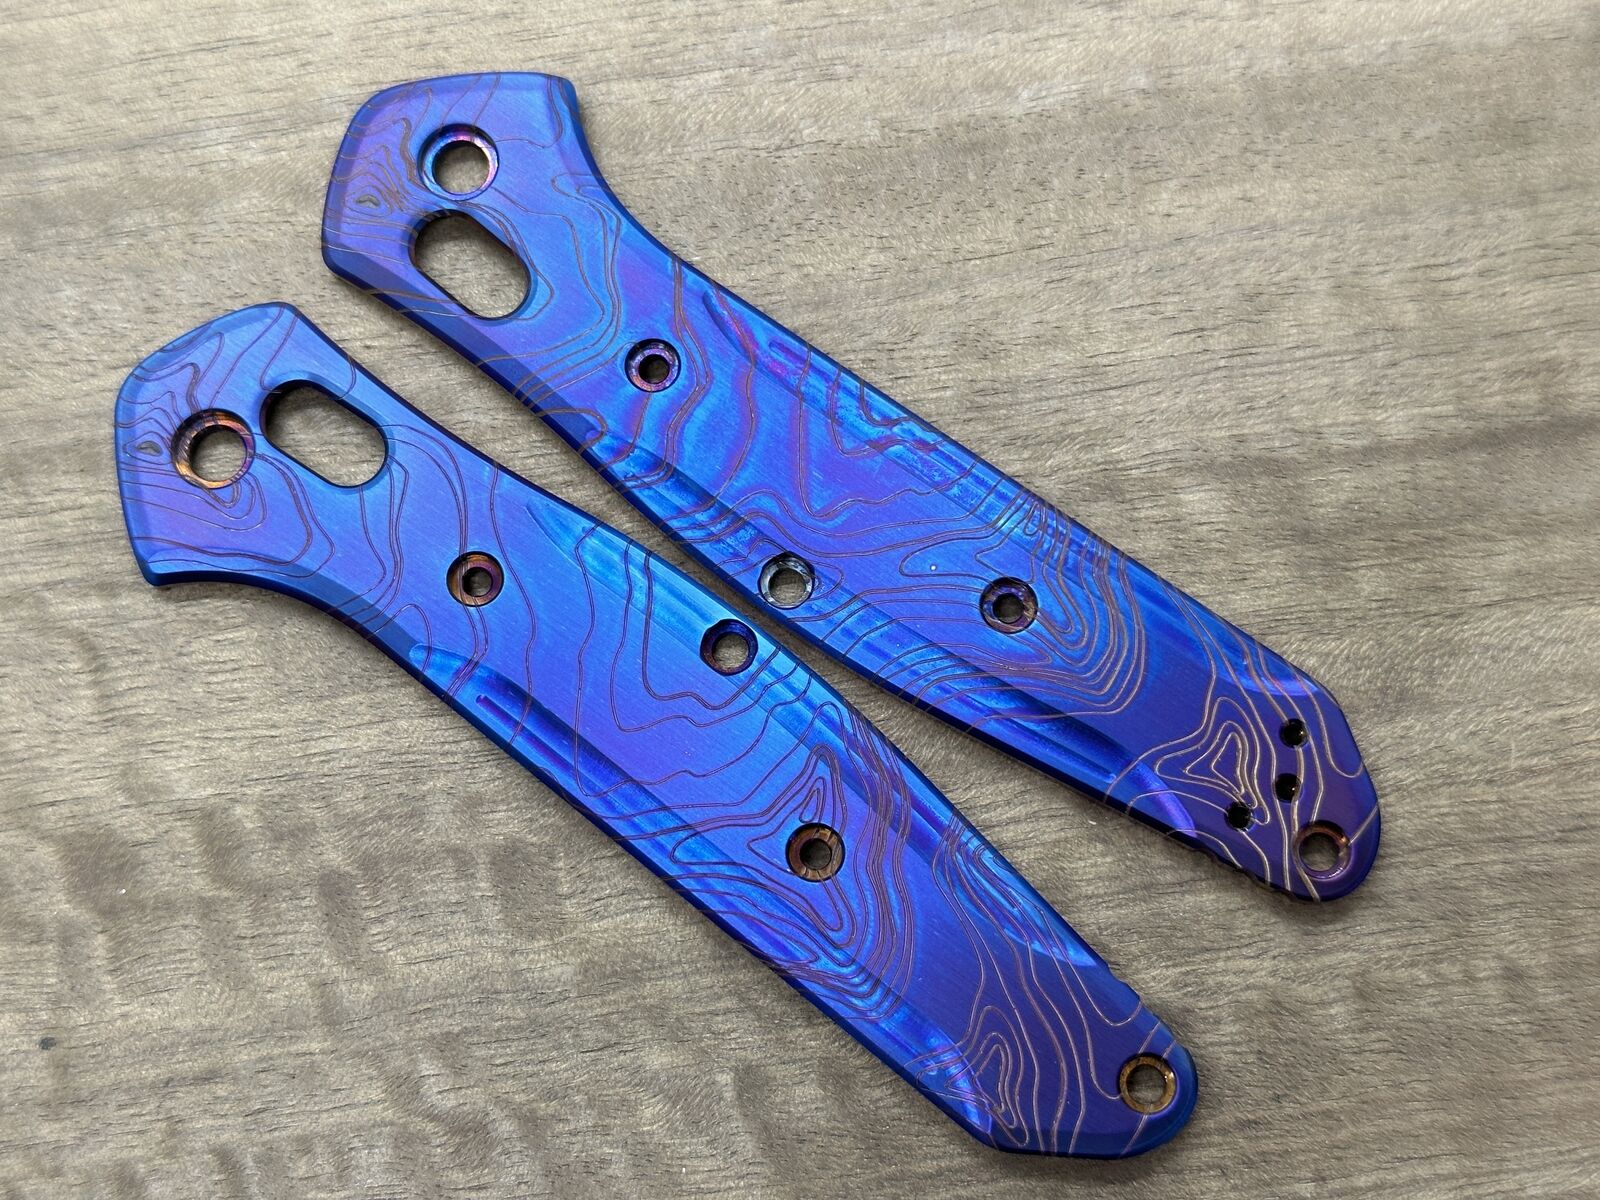 Flamed TOPO engraved Titanium Scales for Benchmade 940 Osborne